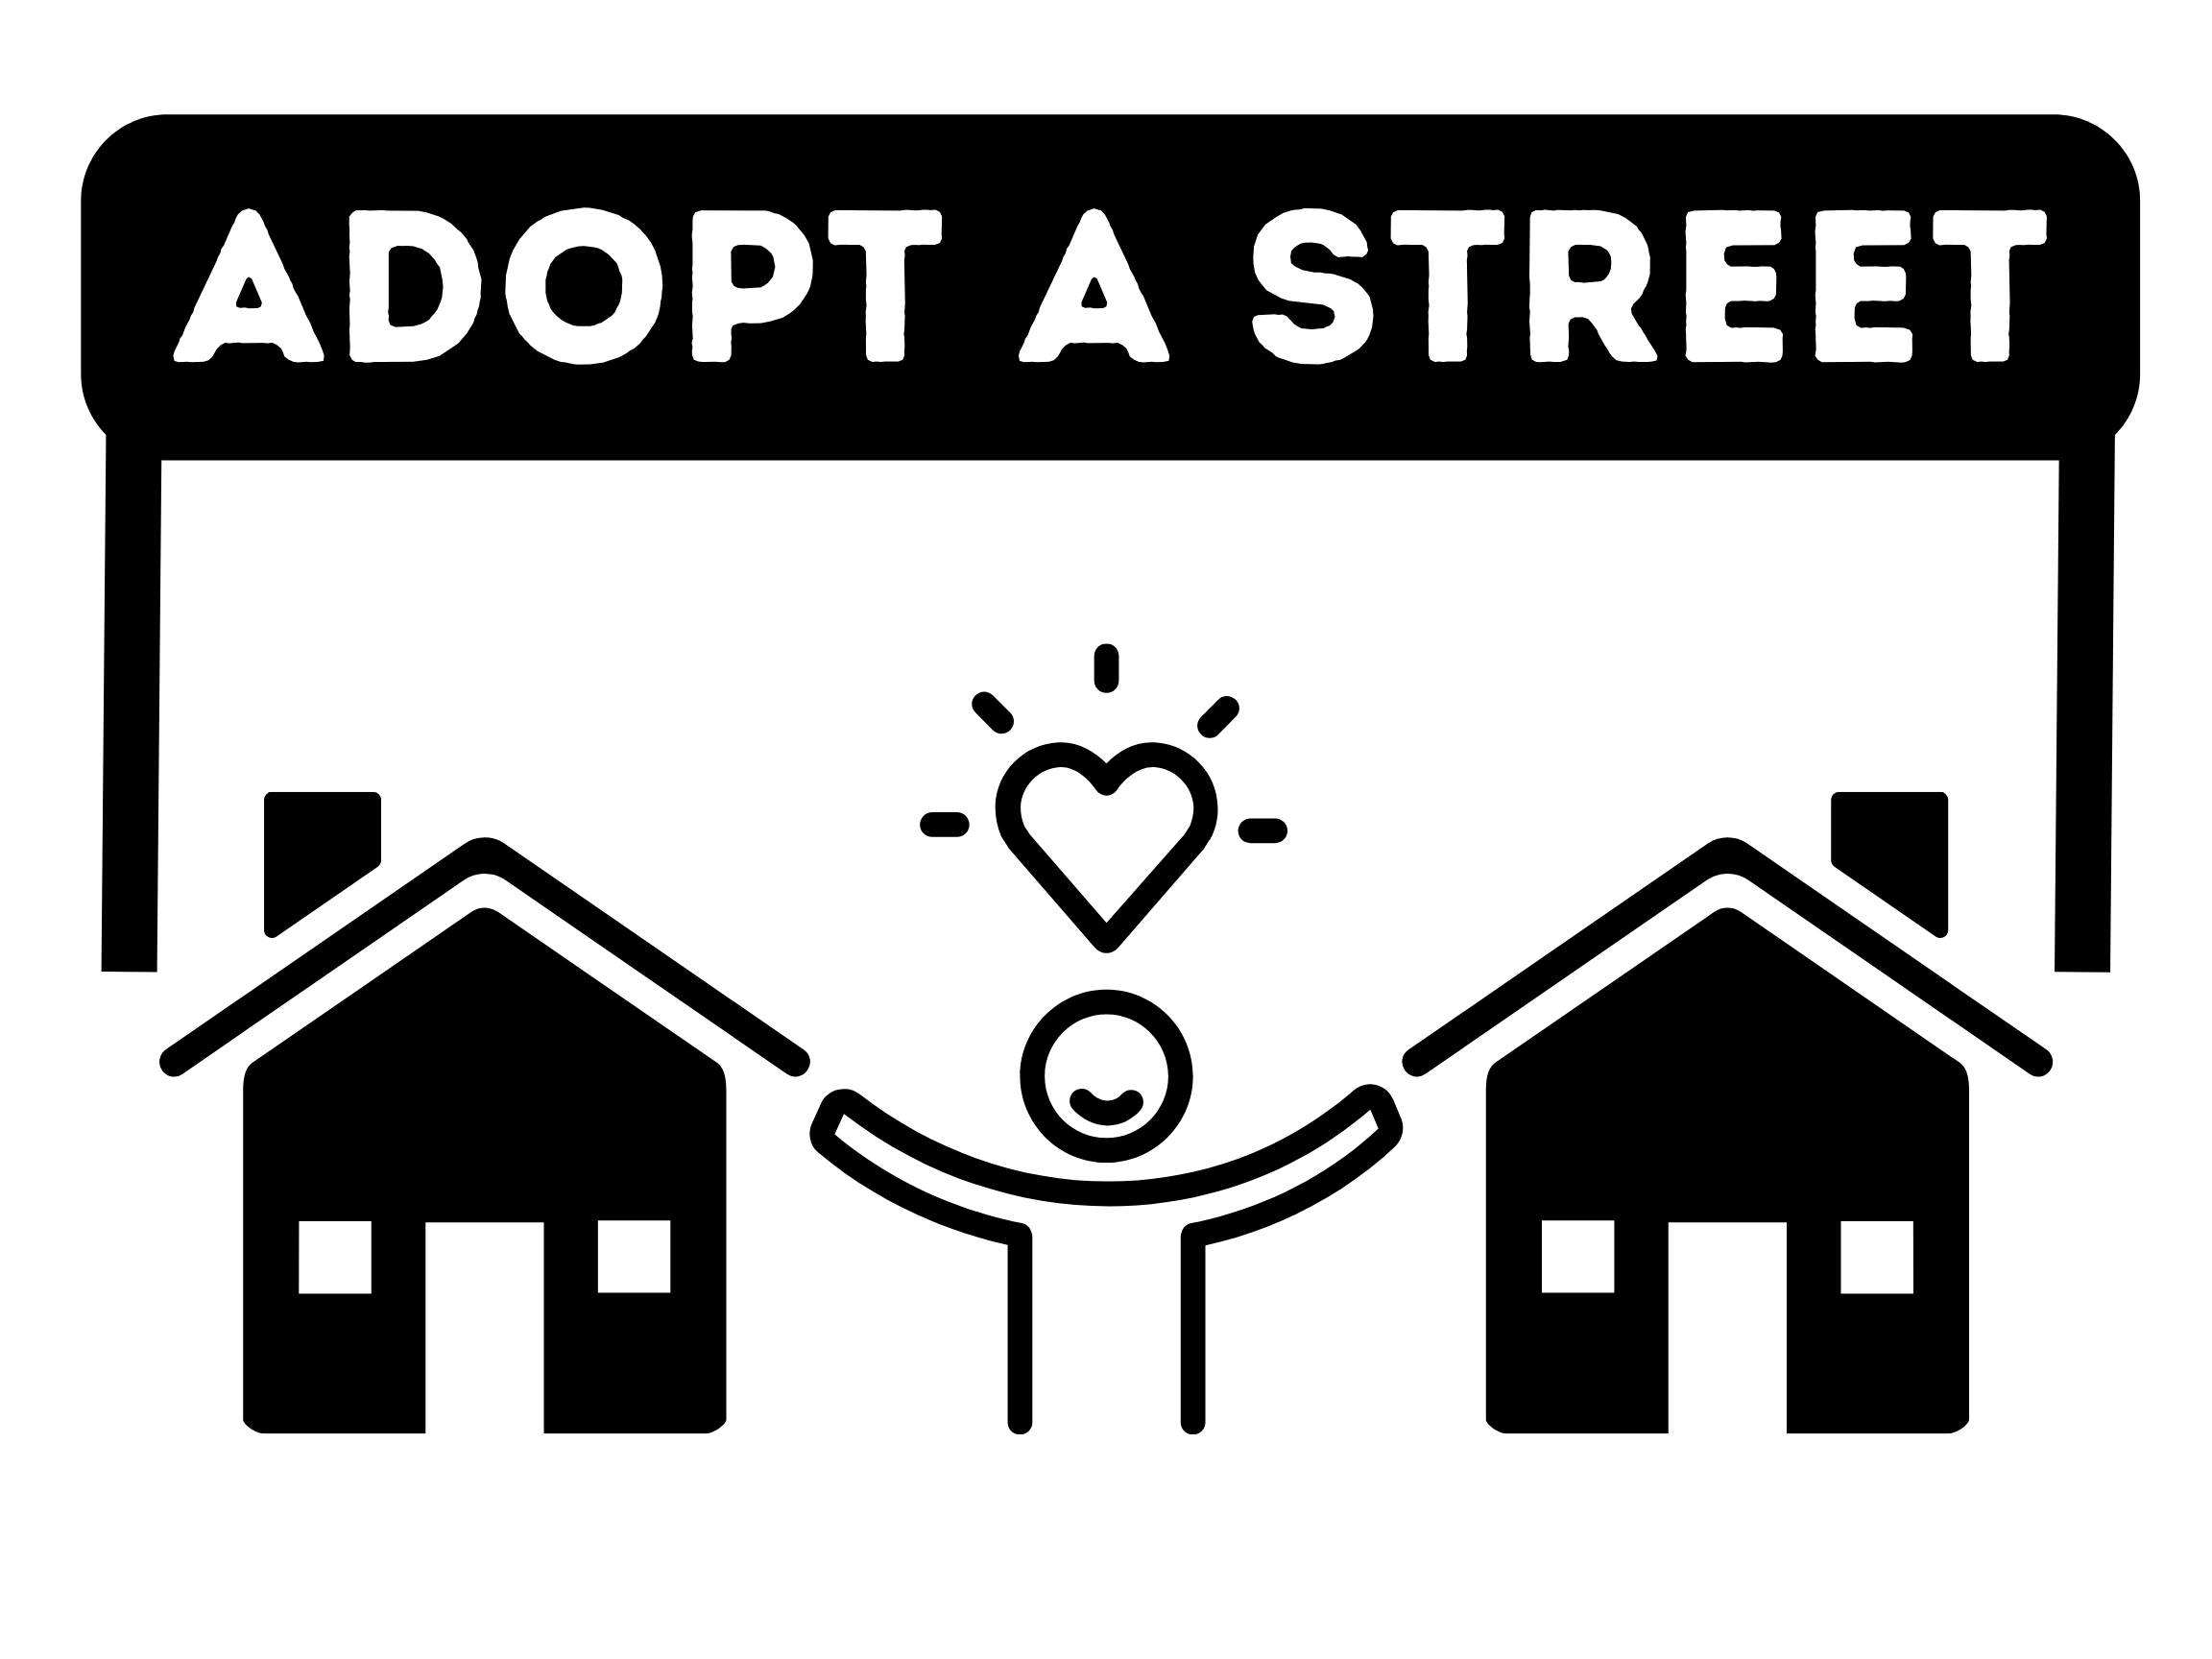 LOGO: Adopt a Street written on a street name sign floating above 2 houses with a person stood in between them holding a heart